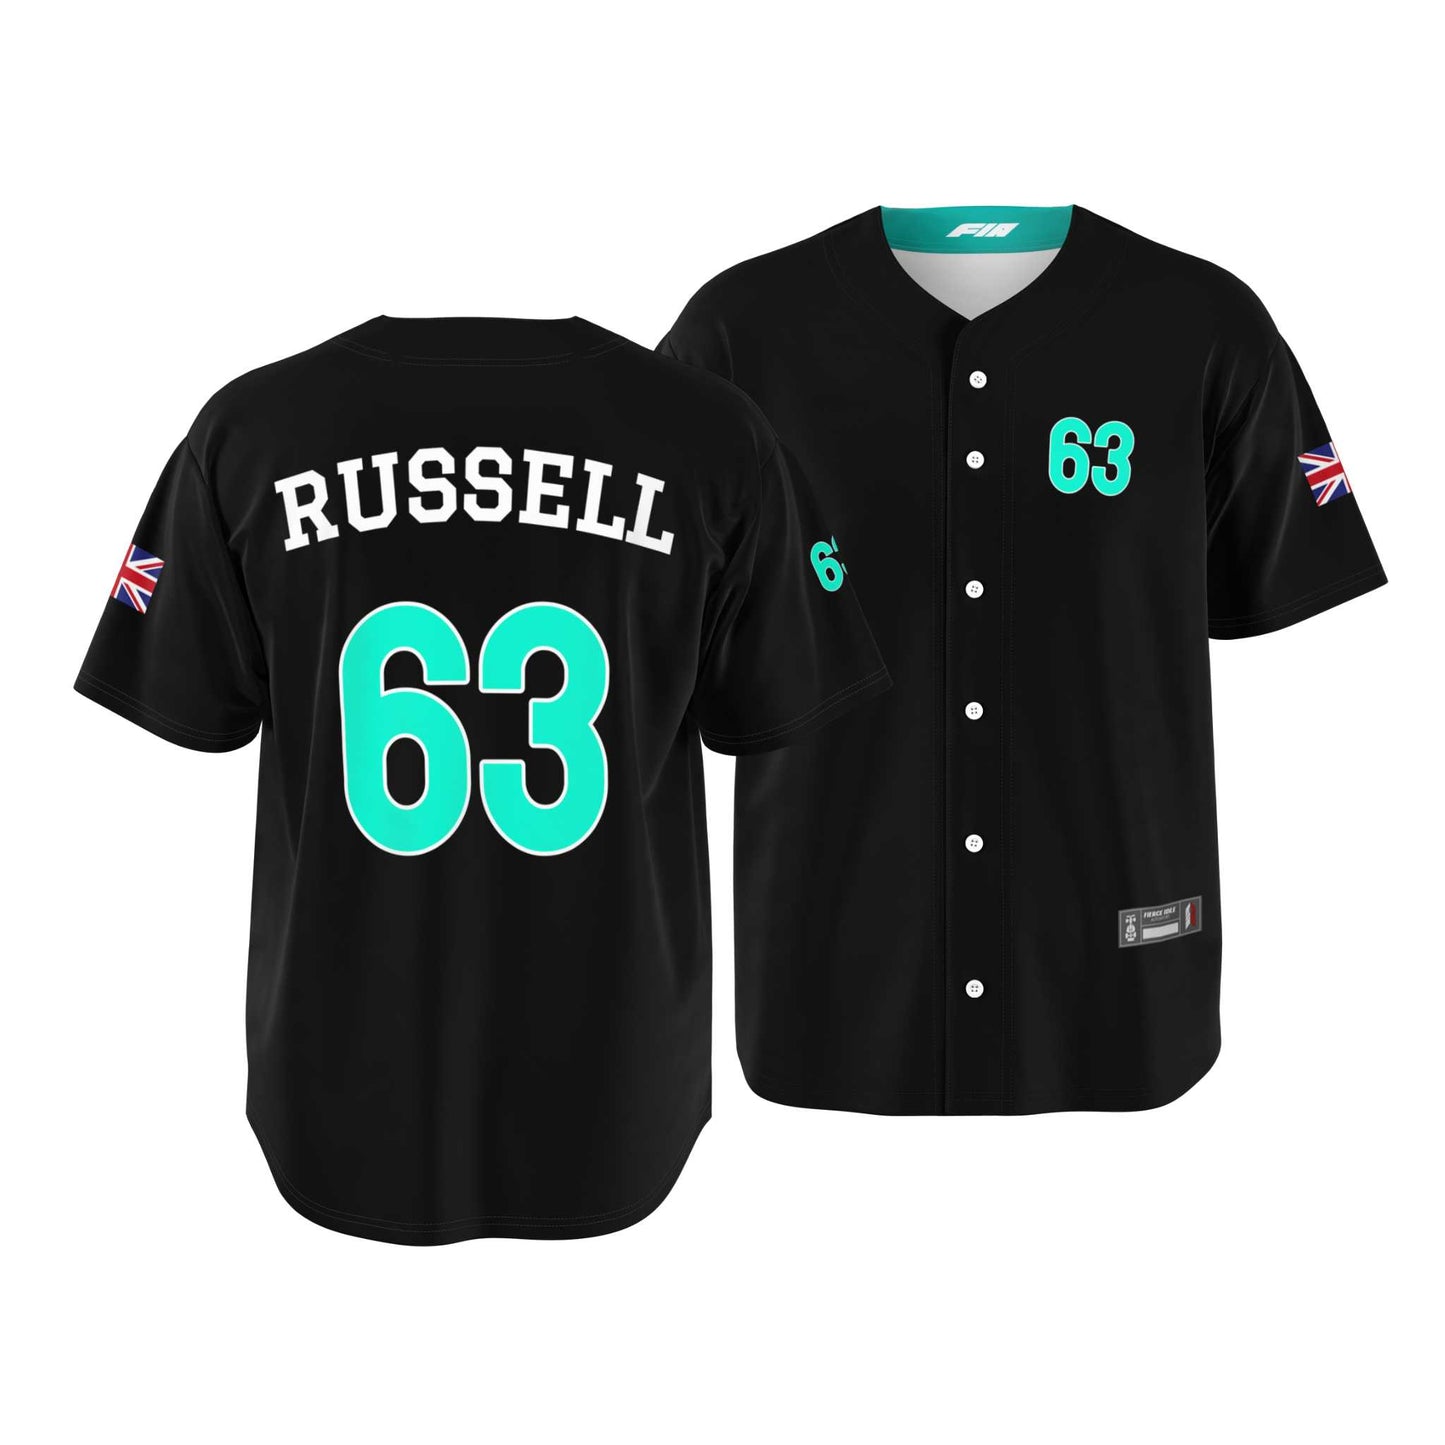 George Russell F1 Jersey